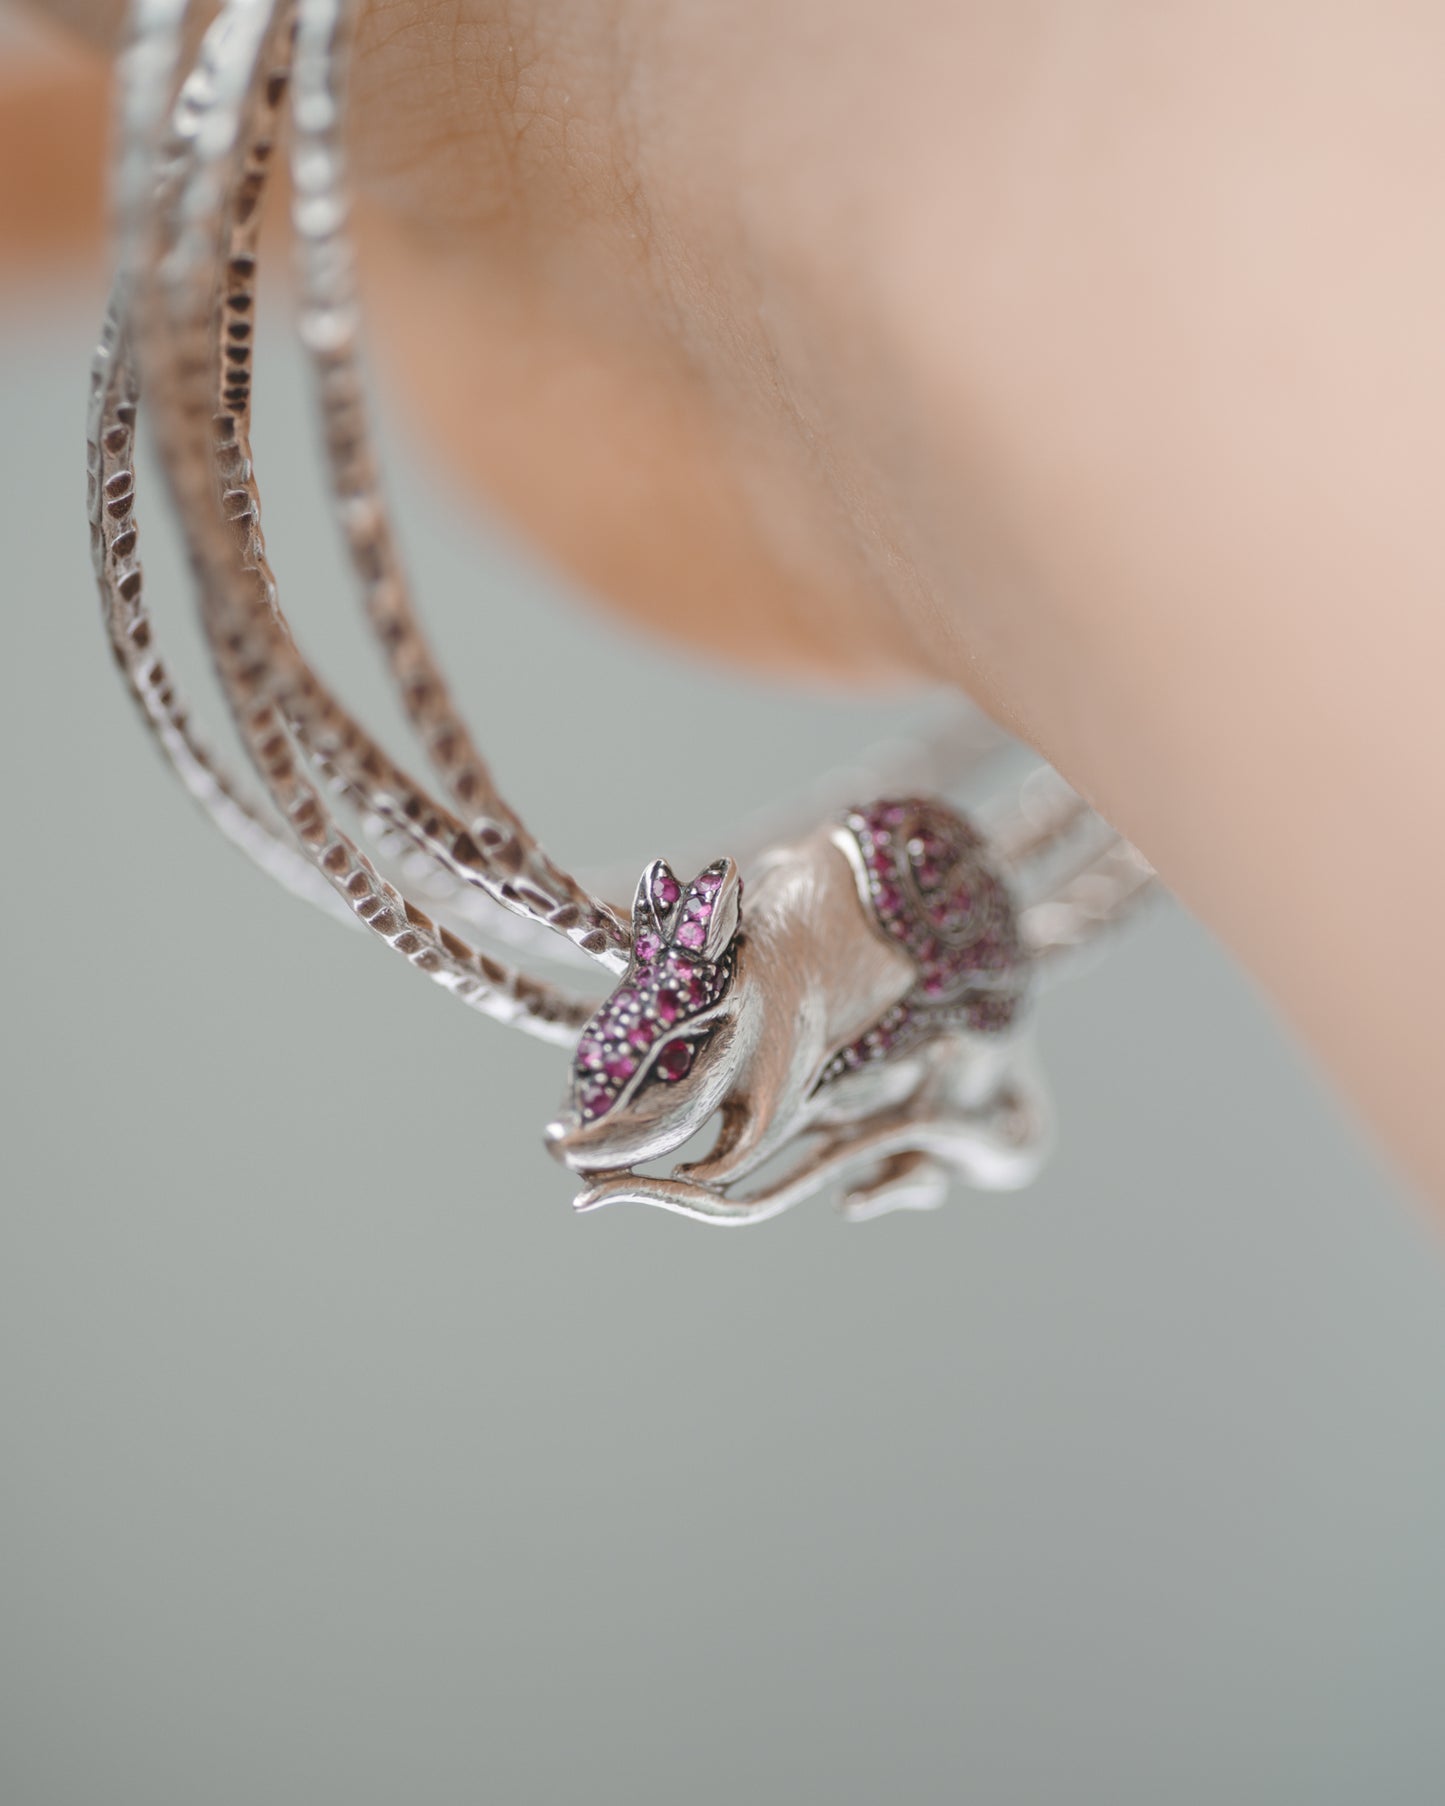 Circle of Life Rat Pendant created from silver and rubies, worn as a bracelet charm